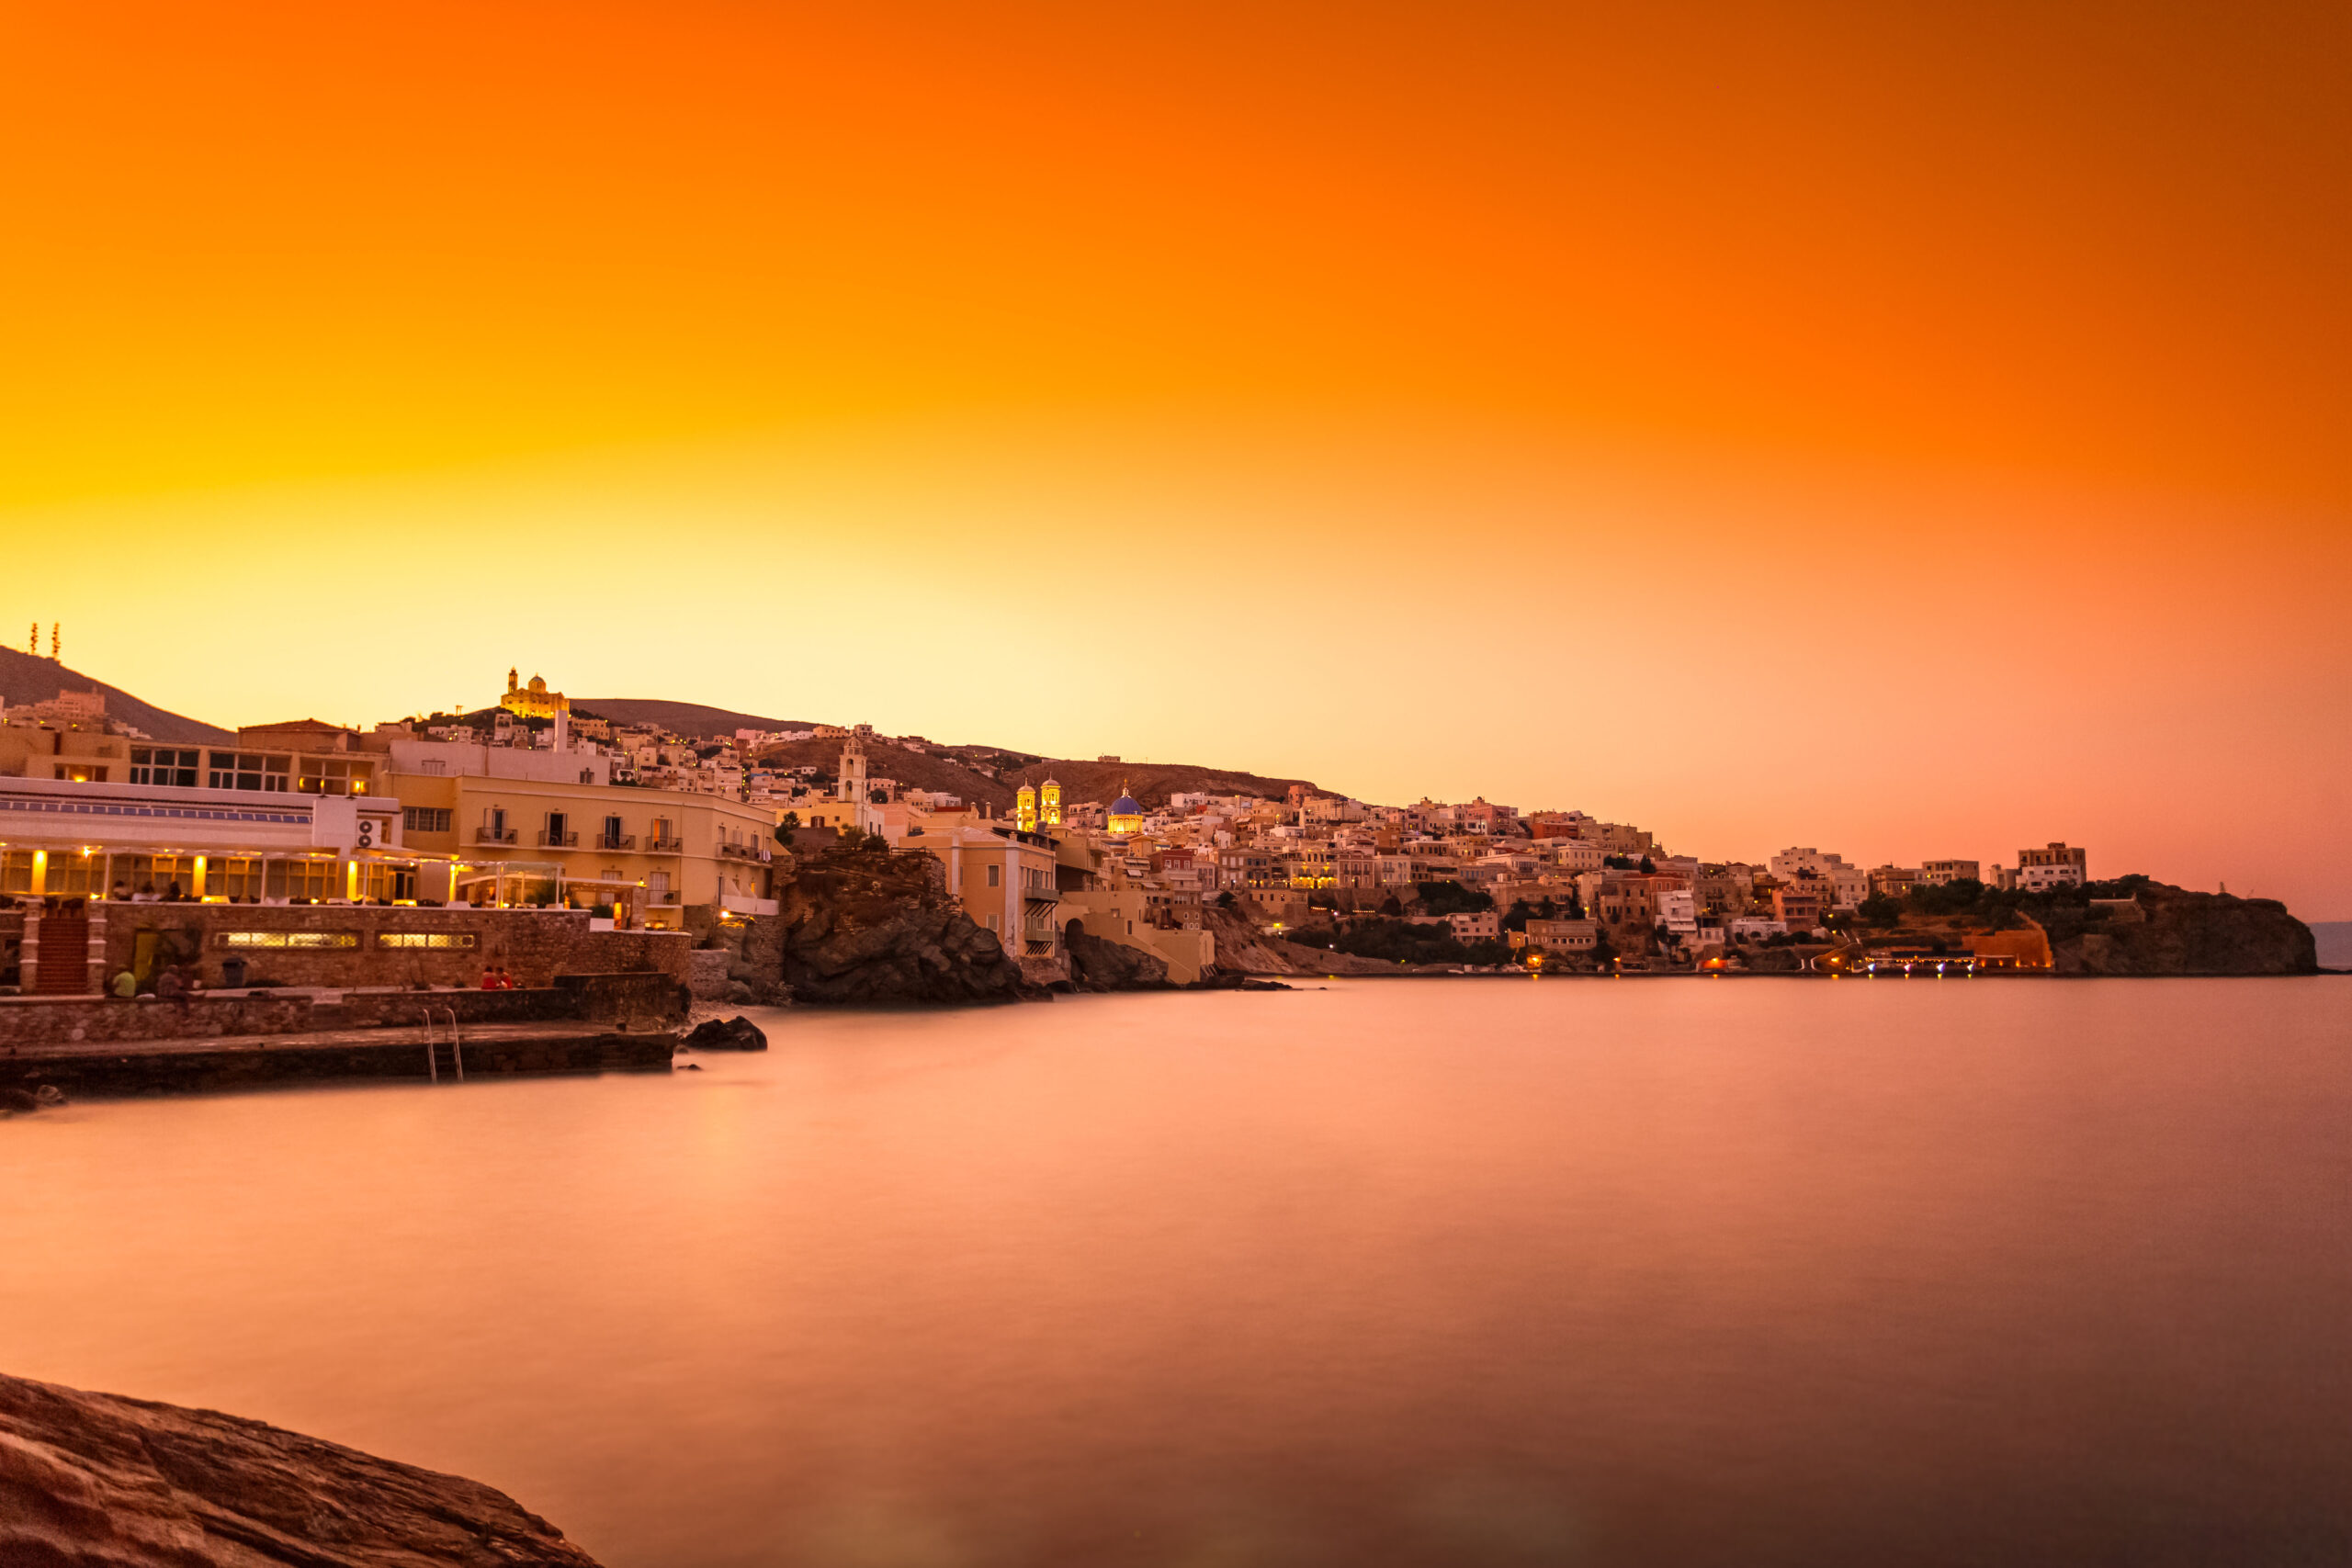 Ermoupolis at Syros island with Vaporia area and traditional houses at dusk or early in the morning before sunrise or sunset, Greece